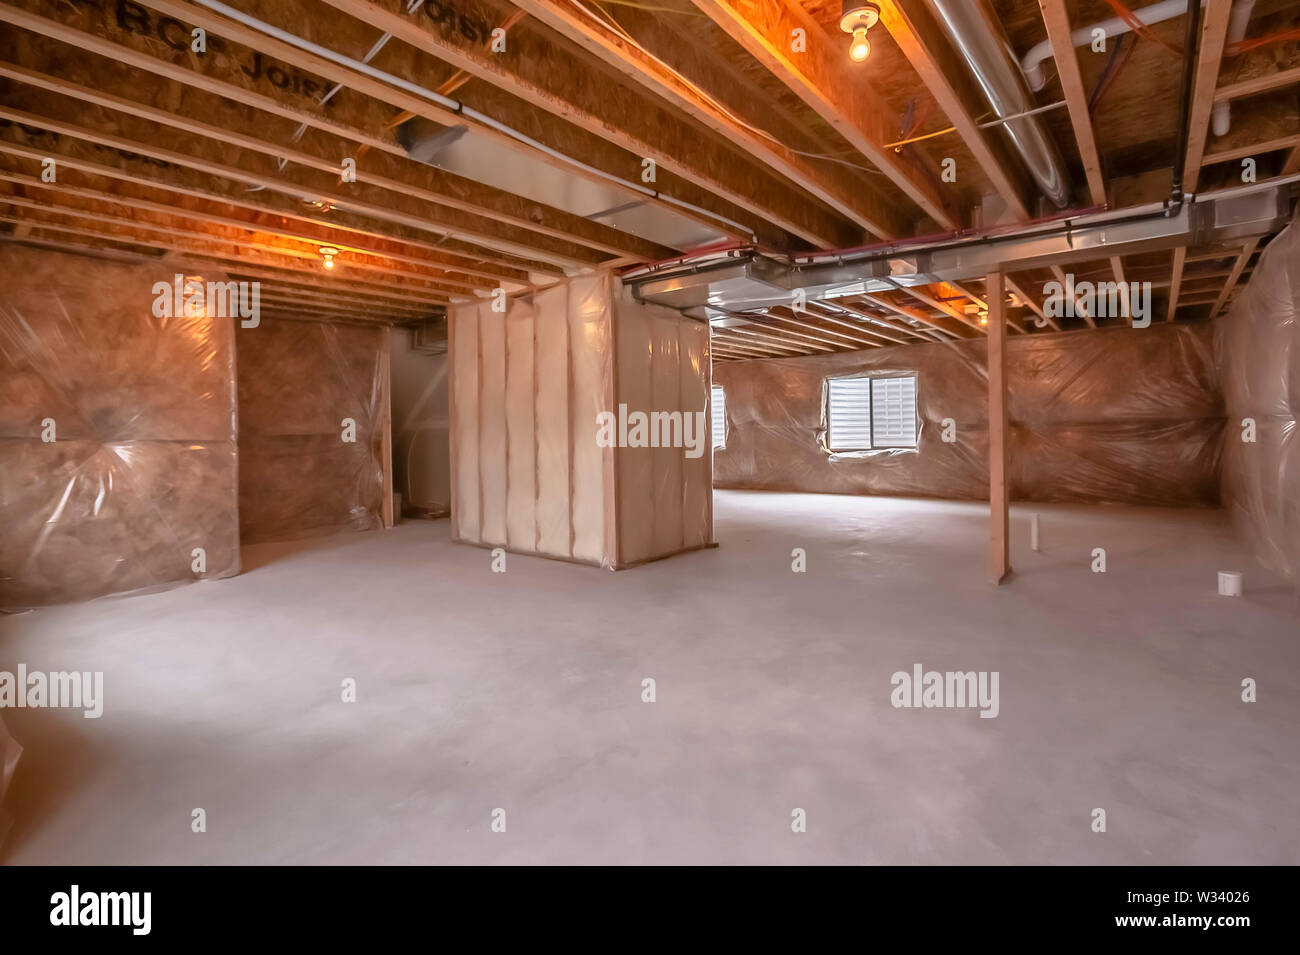 Home Under Construction With Interior Framing Beams And